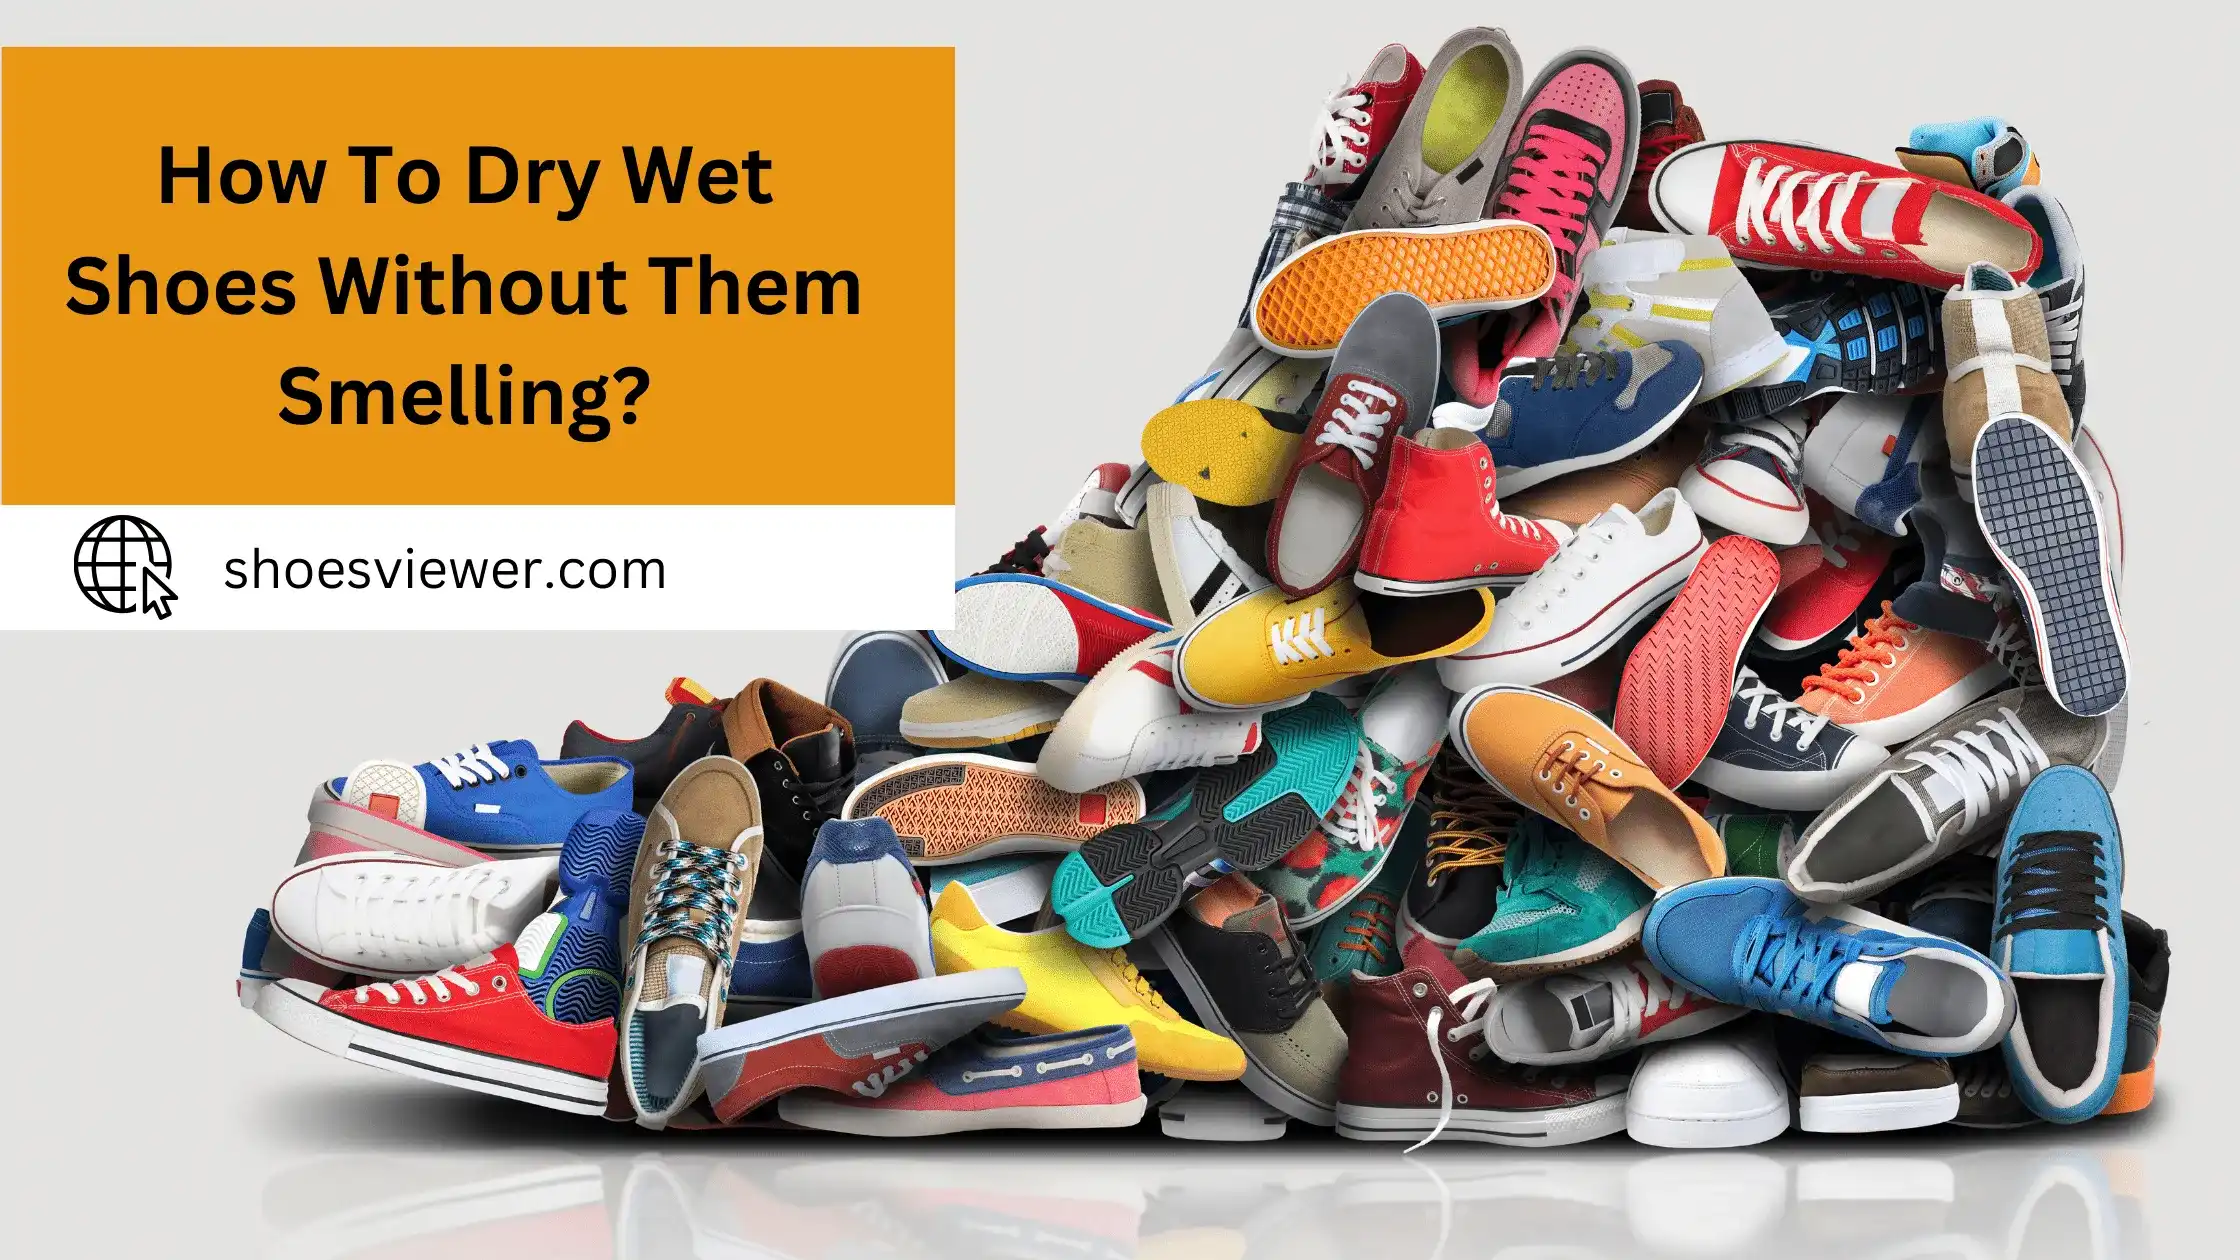 How To Dry Wet Shoes Without Them Smelling? Easy ways